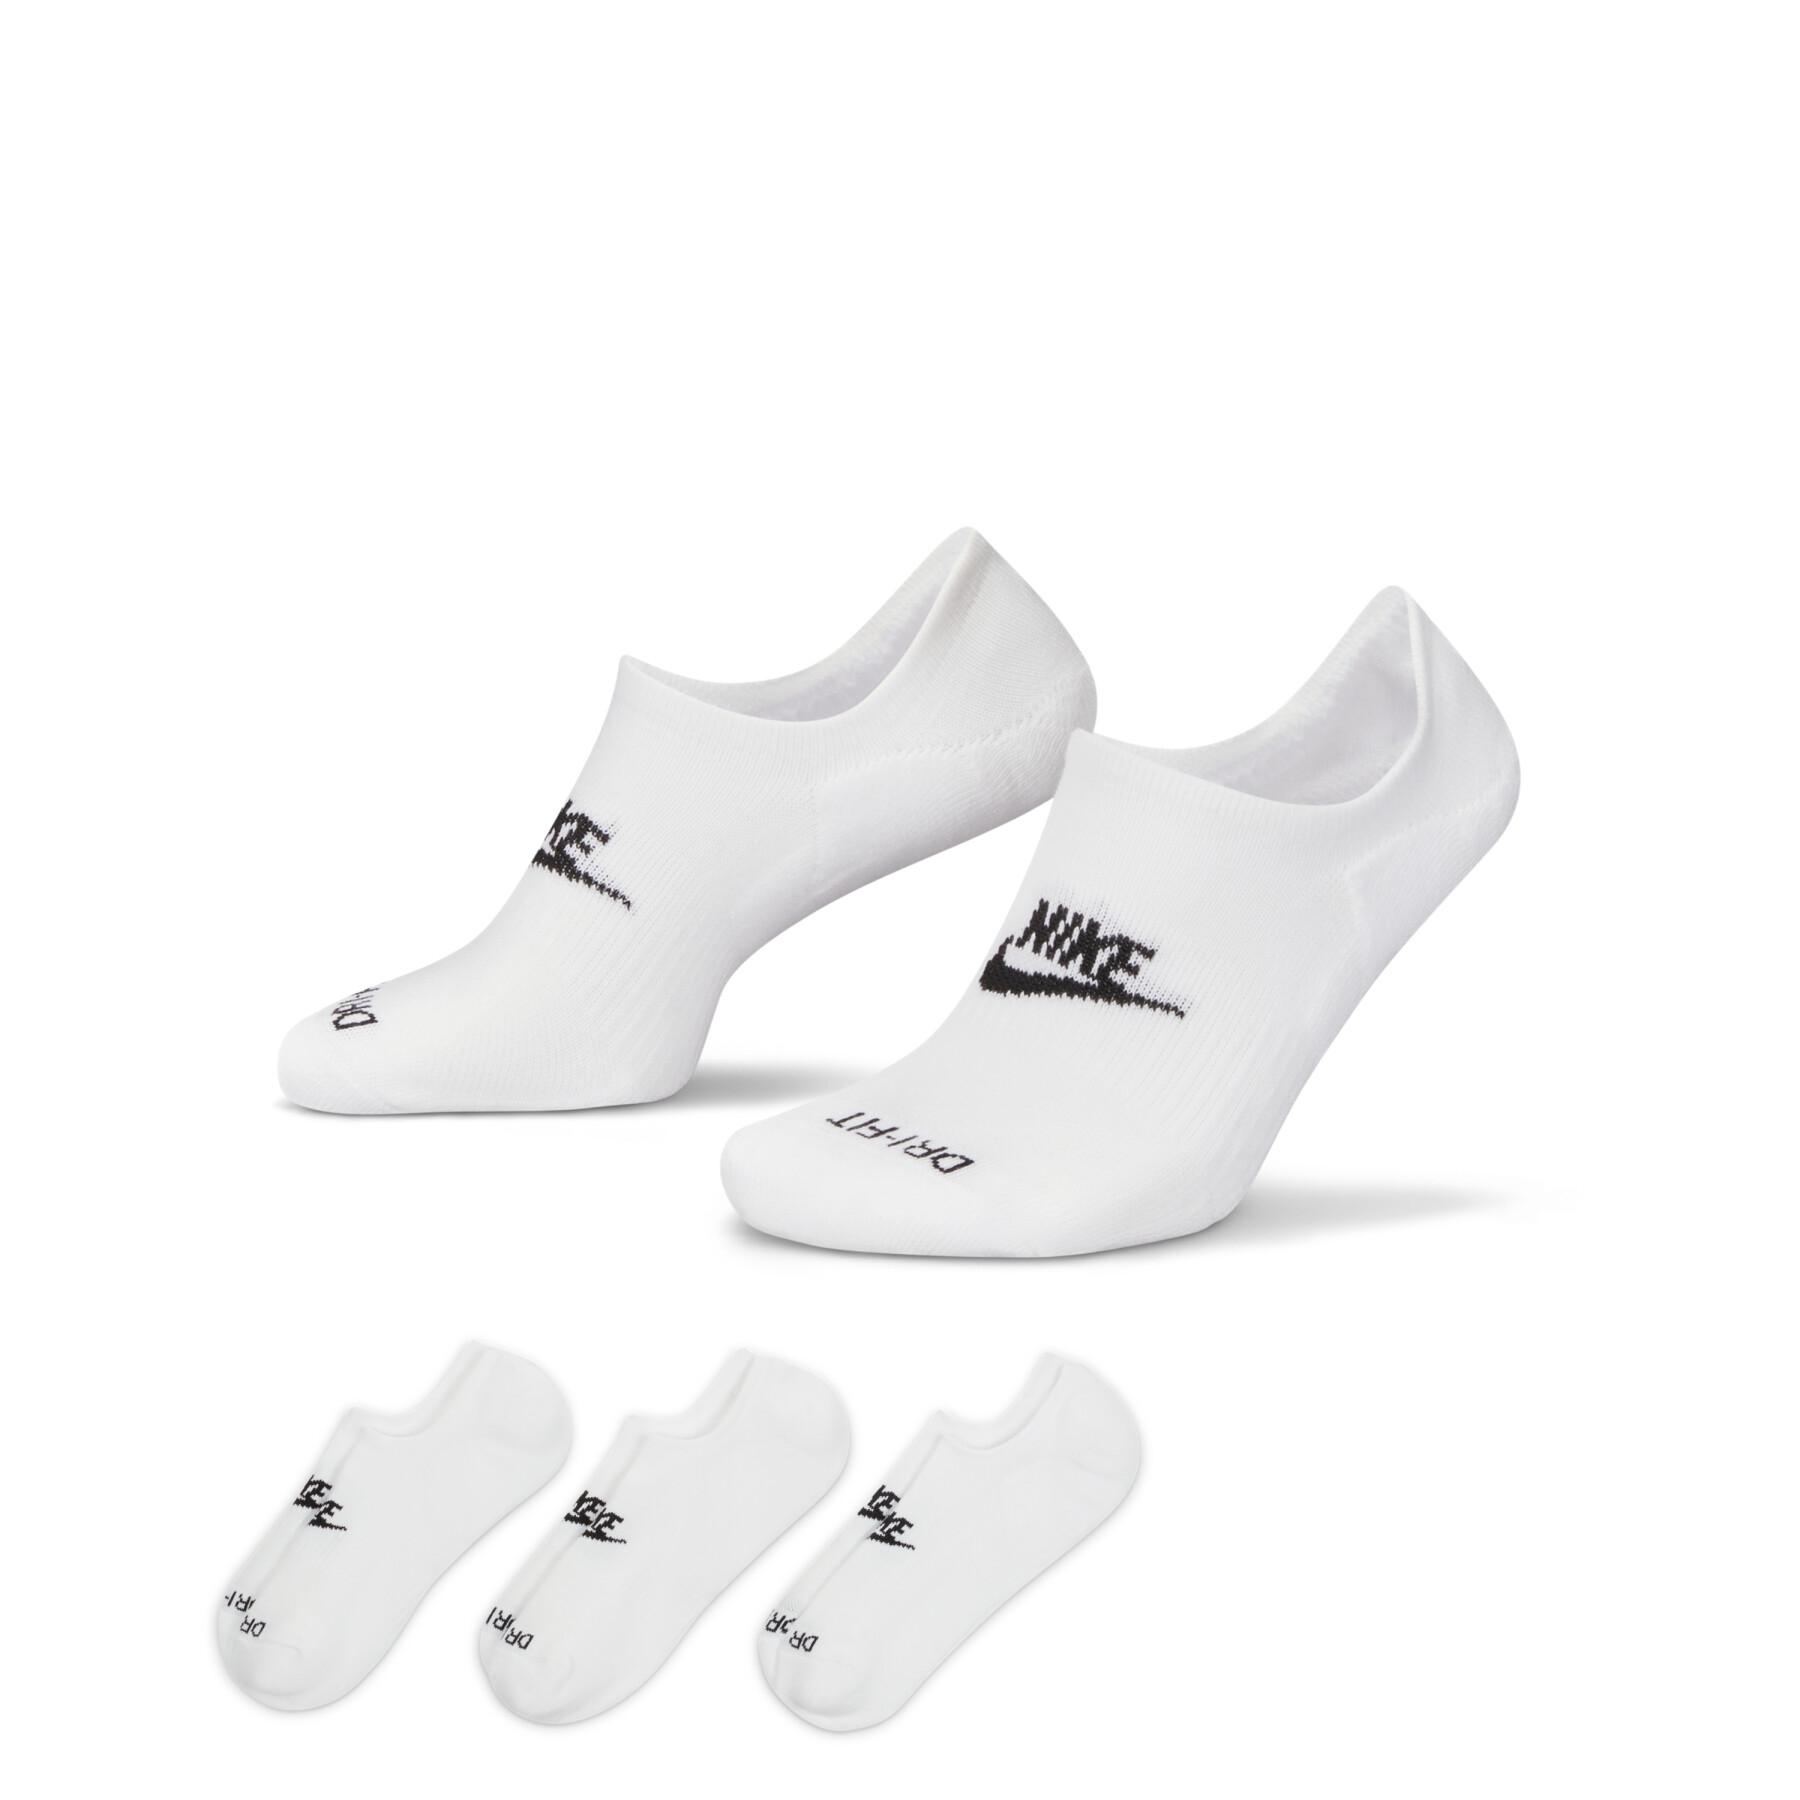 Chaussettes Nike Everyday Plus Cushioned - Chaussettes - Femme